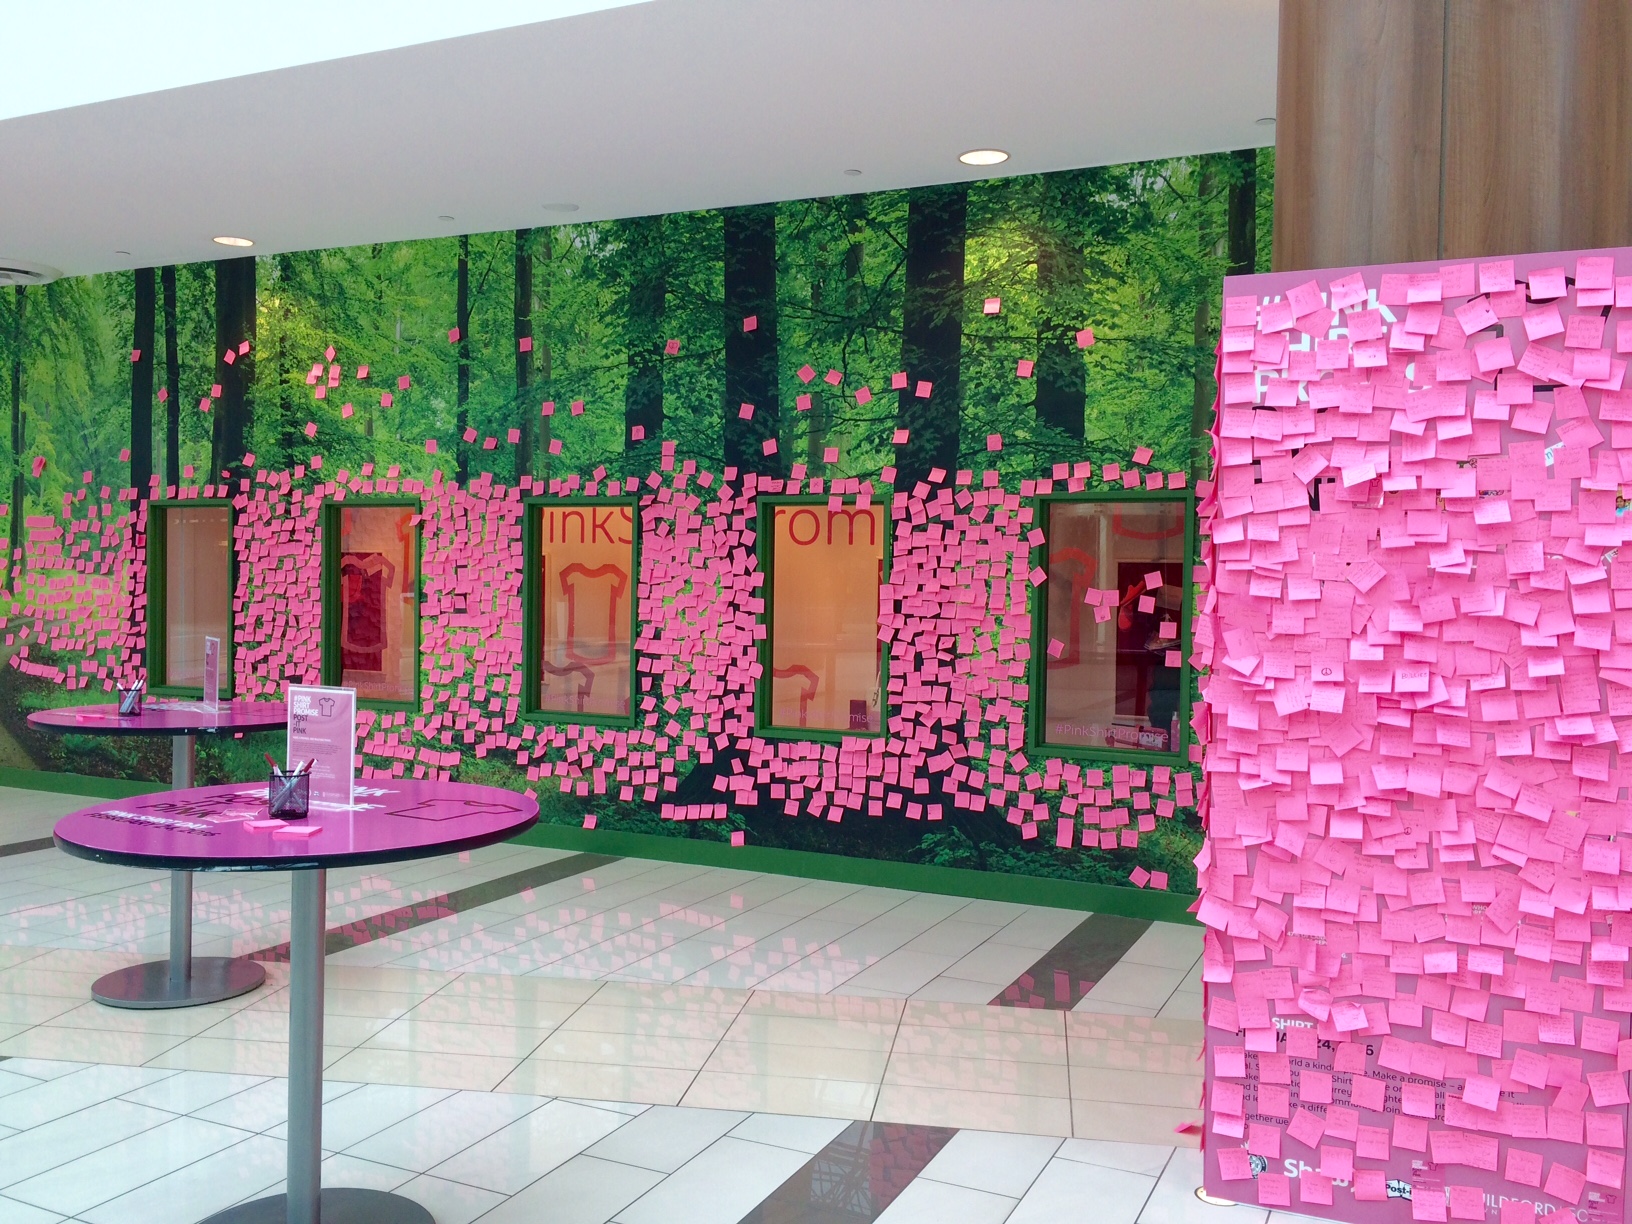 PinkShirtPromise Wall with Post-it notes